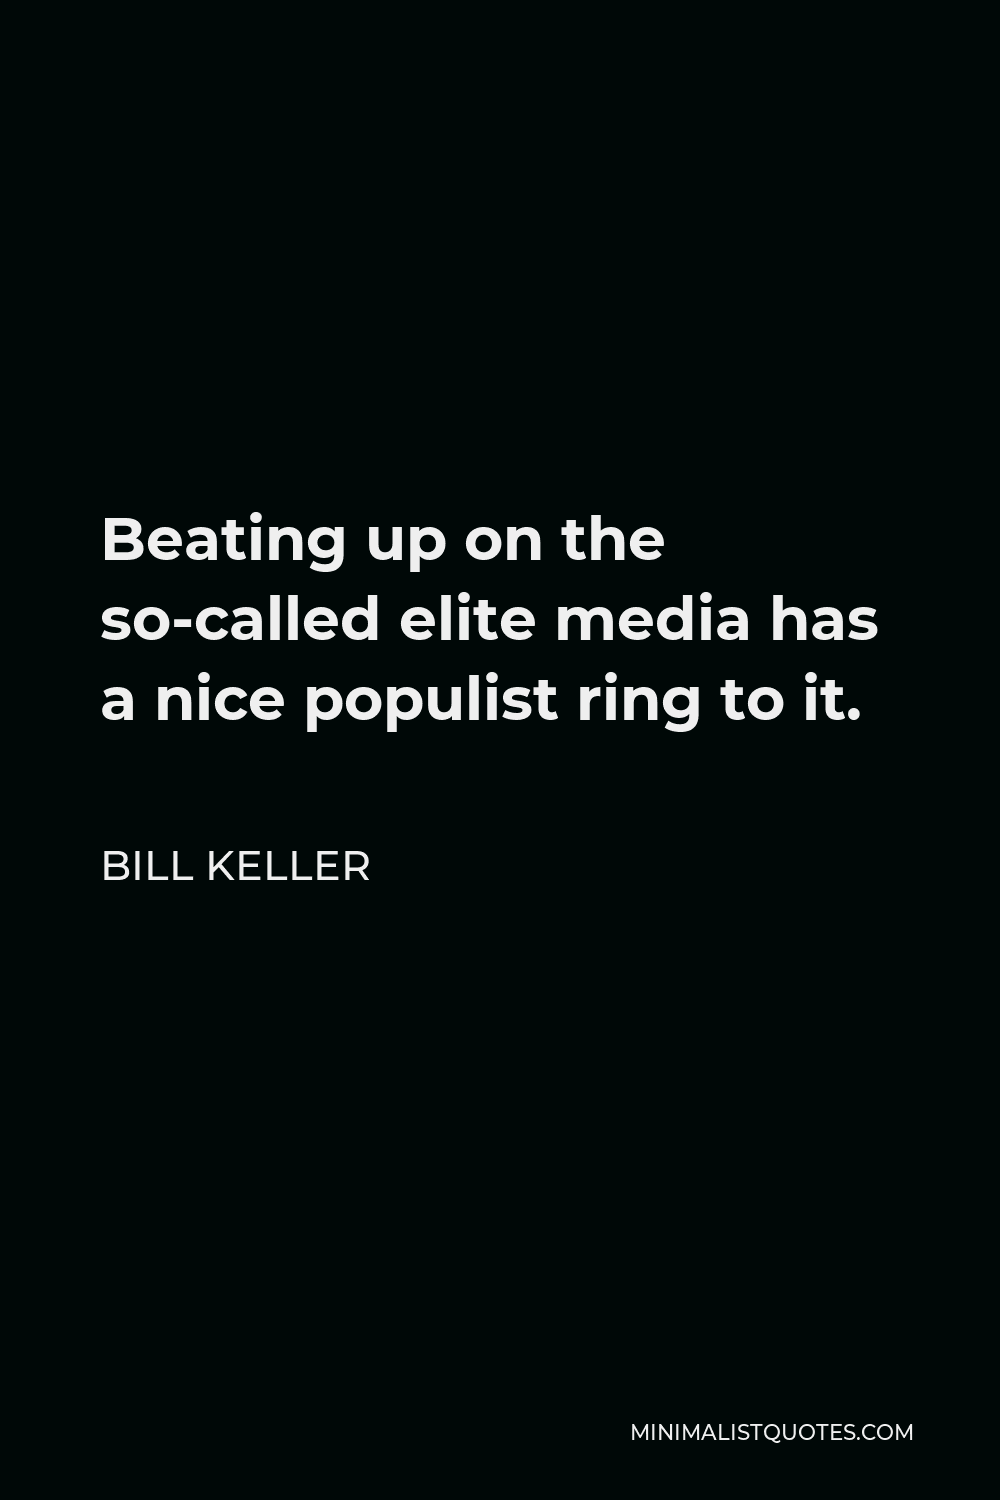 Bill Keller Quote - Beating up on the so-called elite media has a nice populist ring to it.